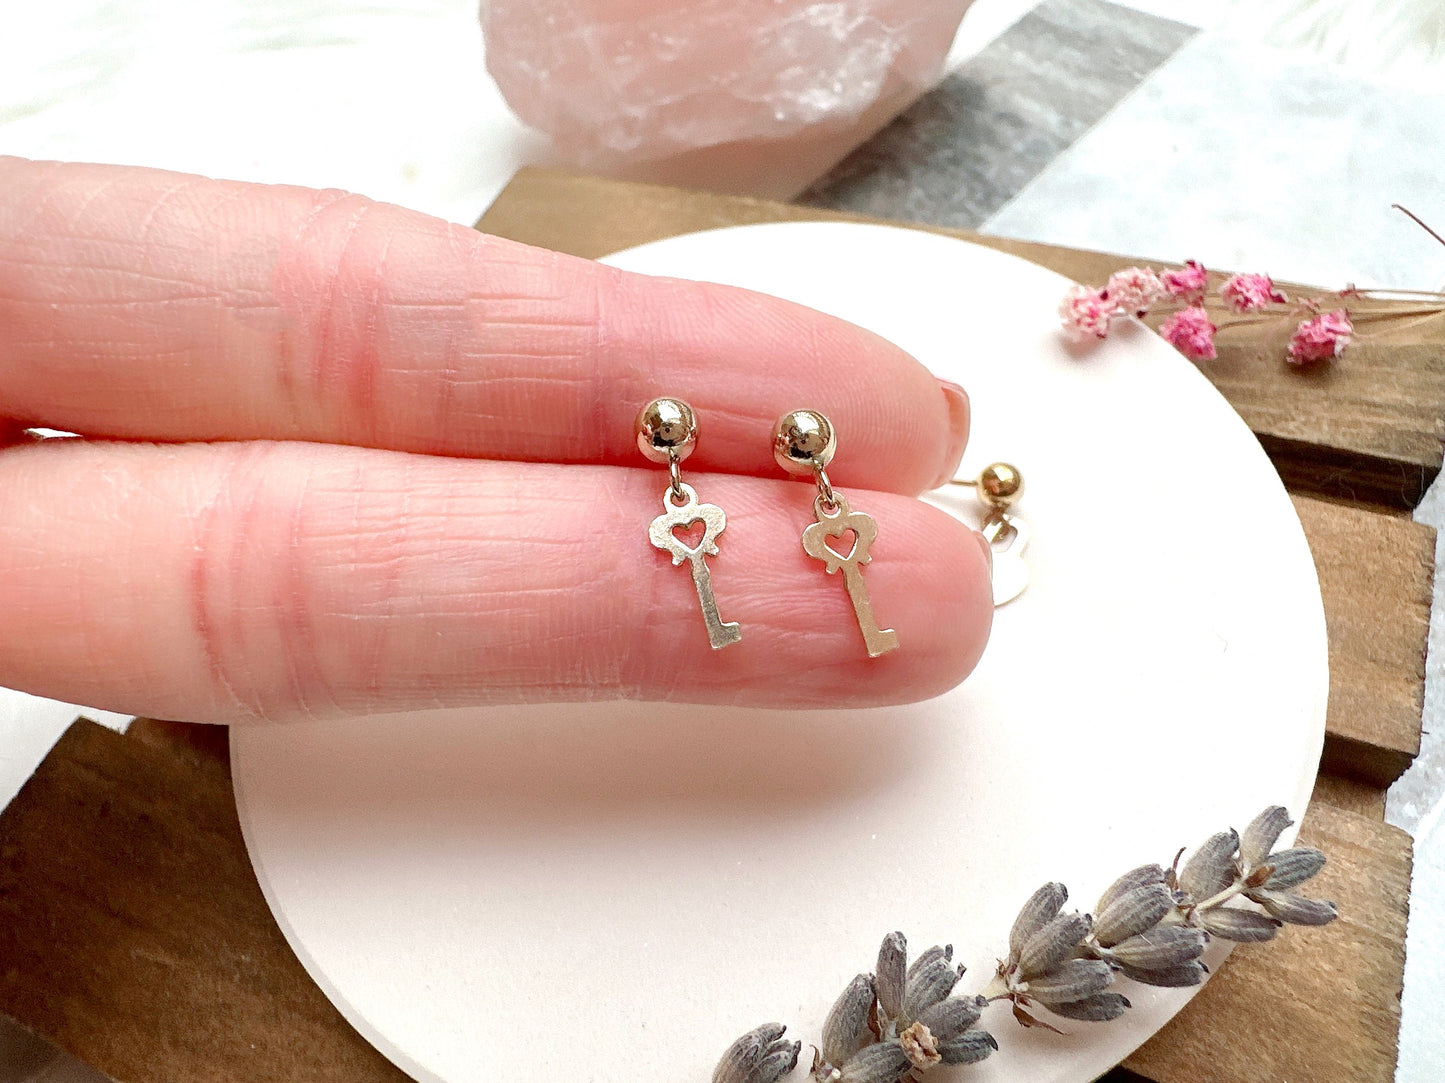 Dainty Gold Stud Earrings with Key or Lock Charms